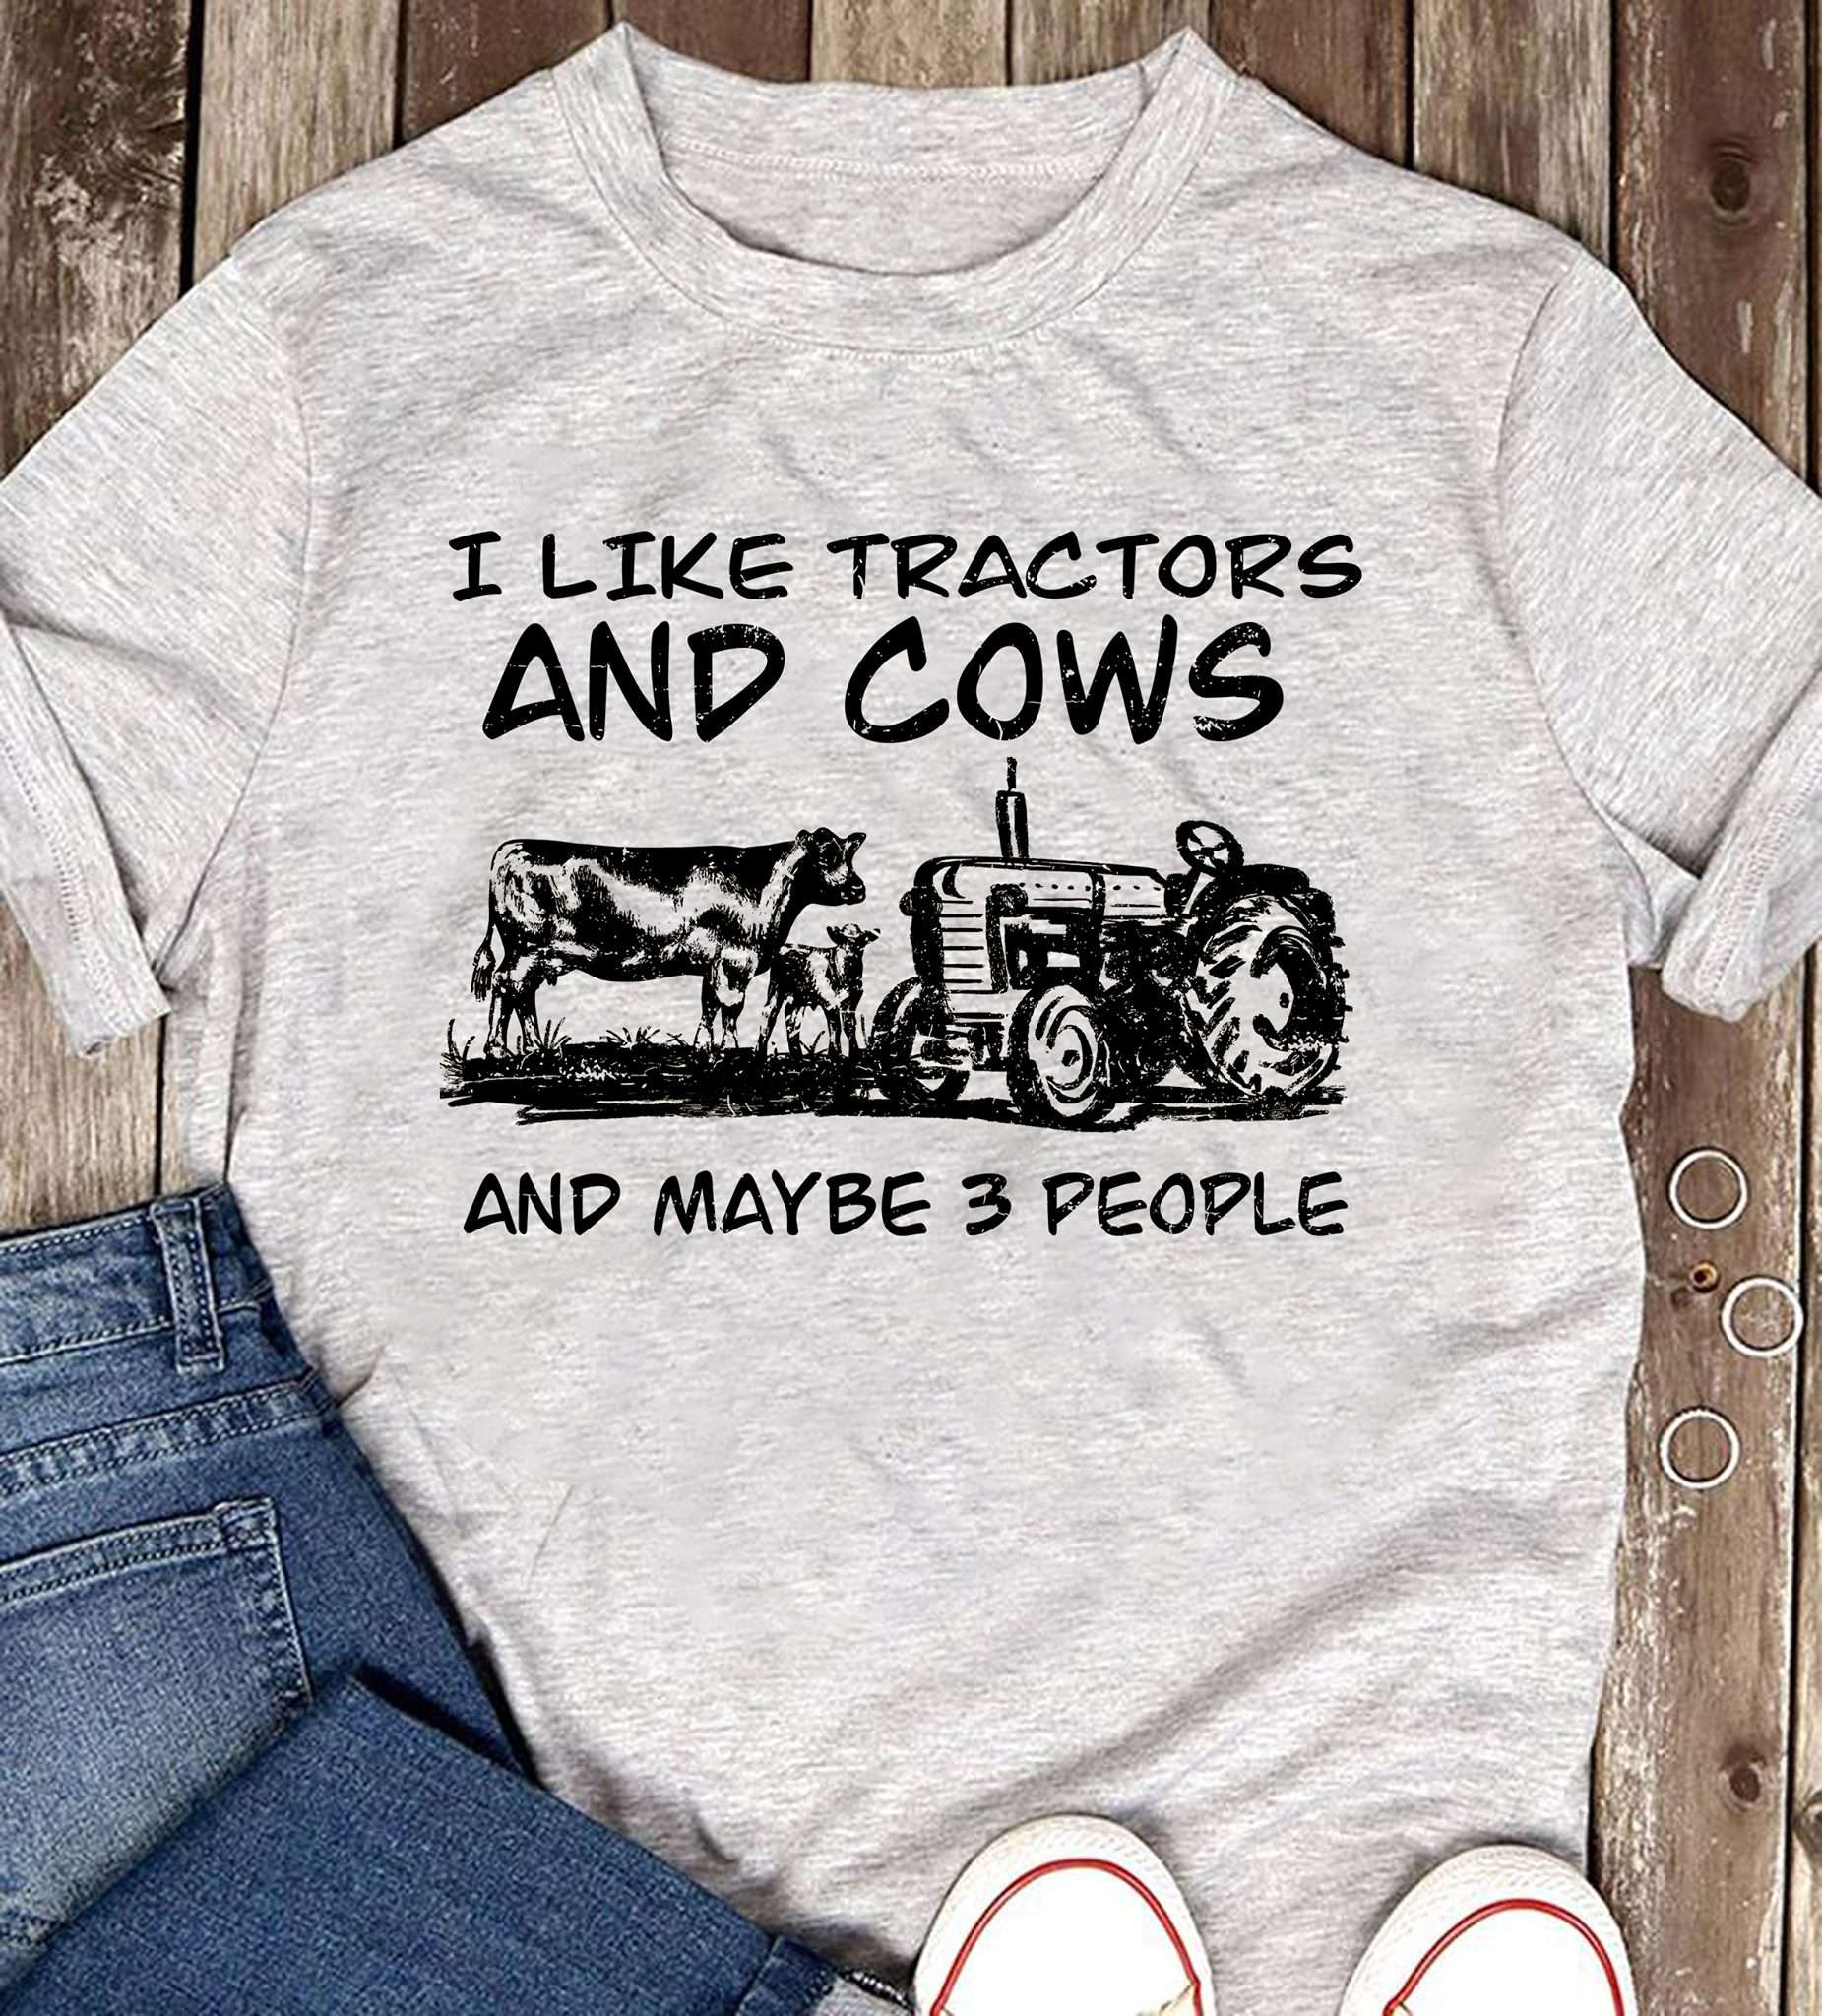 Cows Tractors - I like tractors and cows and maybe 3 people